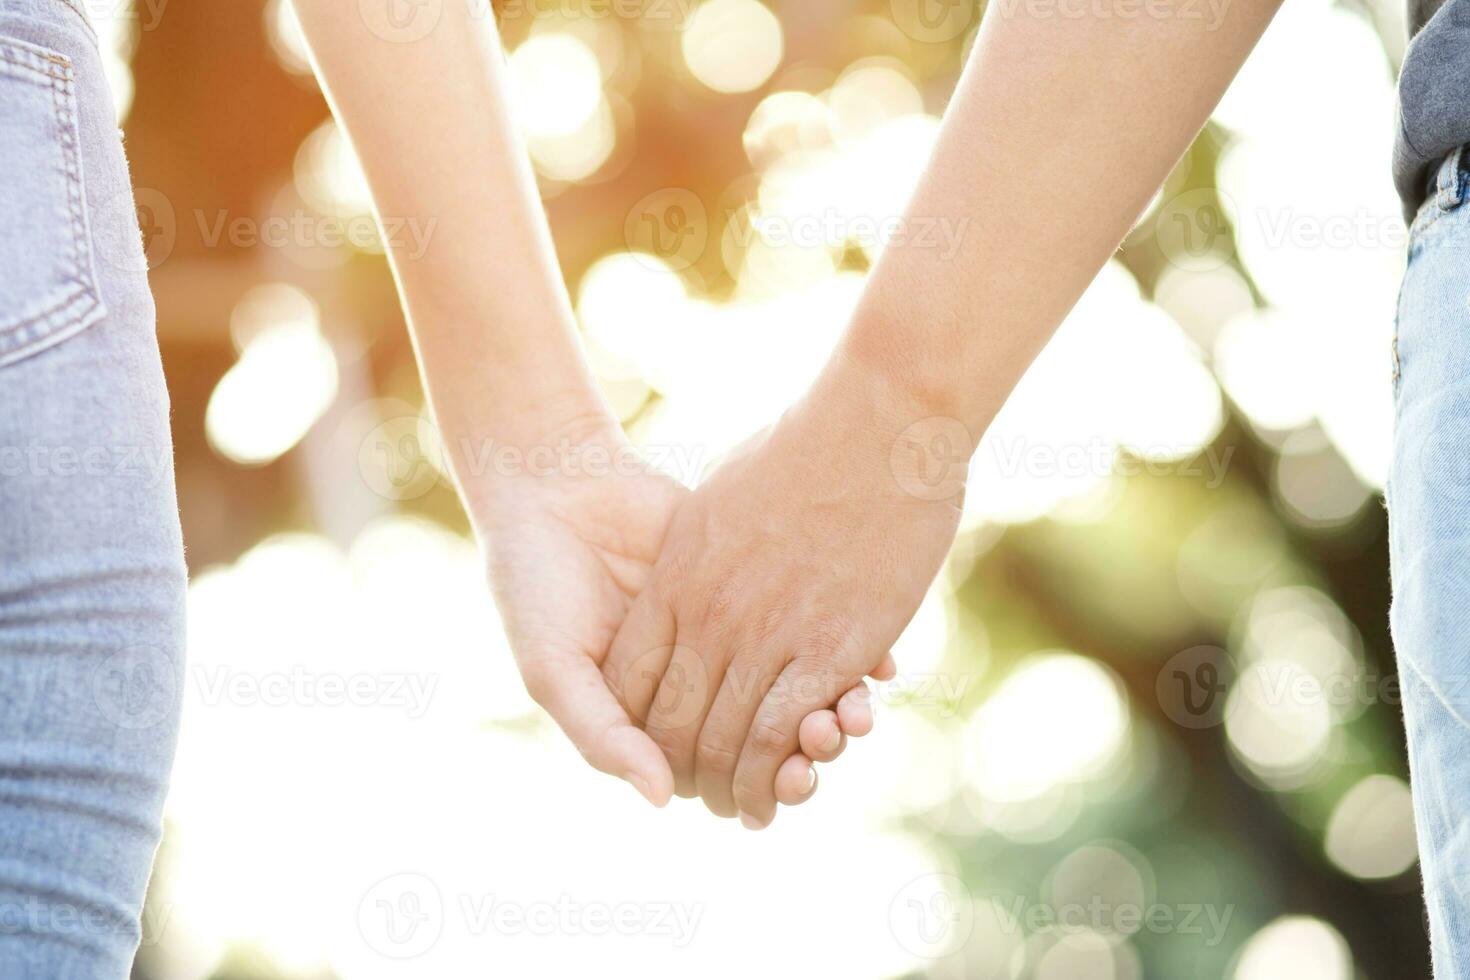 Couple lovers romantic holding hands towards with bright sun flare in public parks, or close up view in a conceptual image first love adolescent young relationship. lover photo